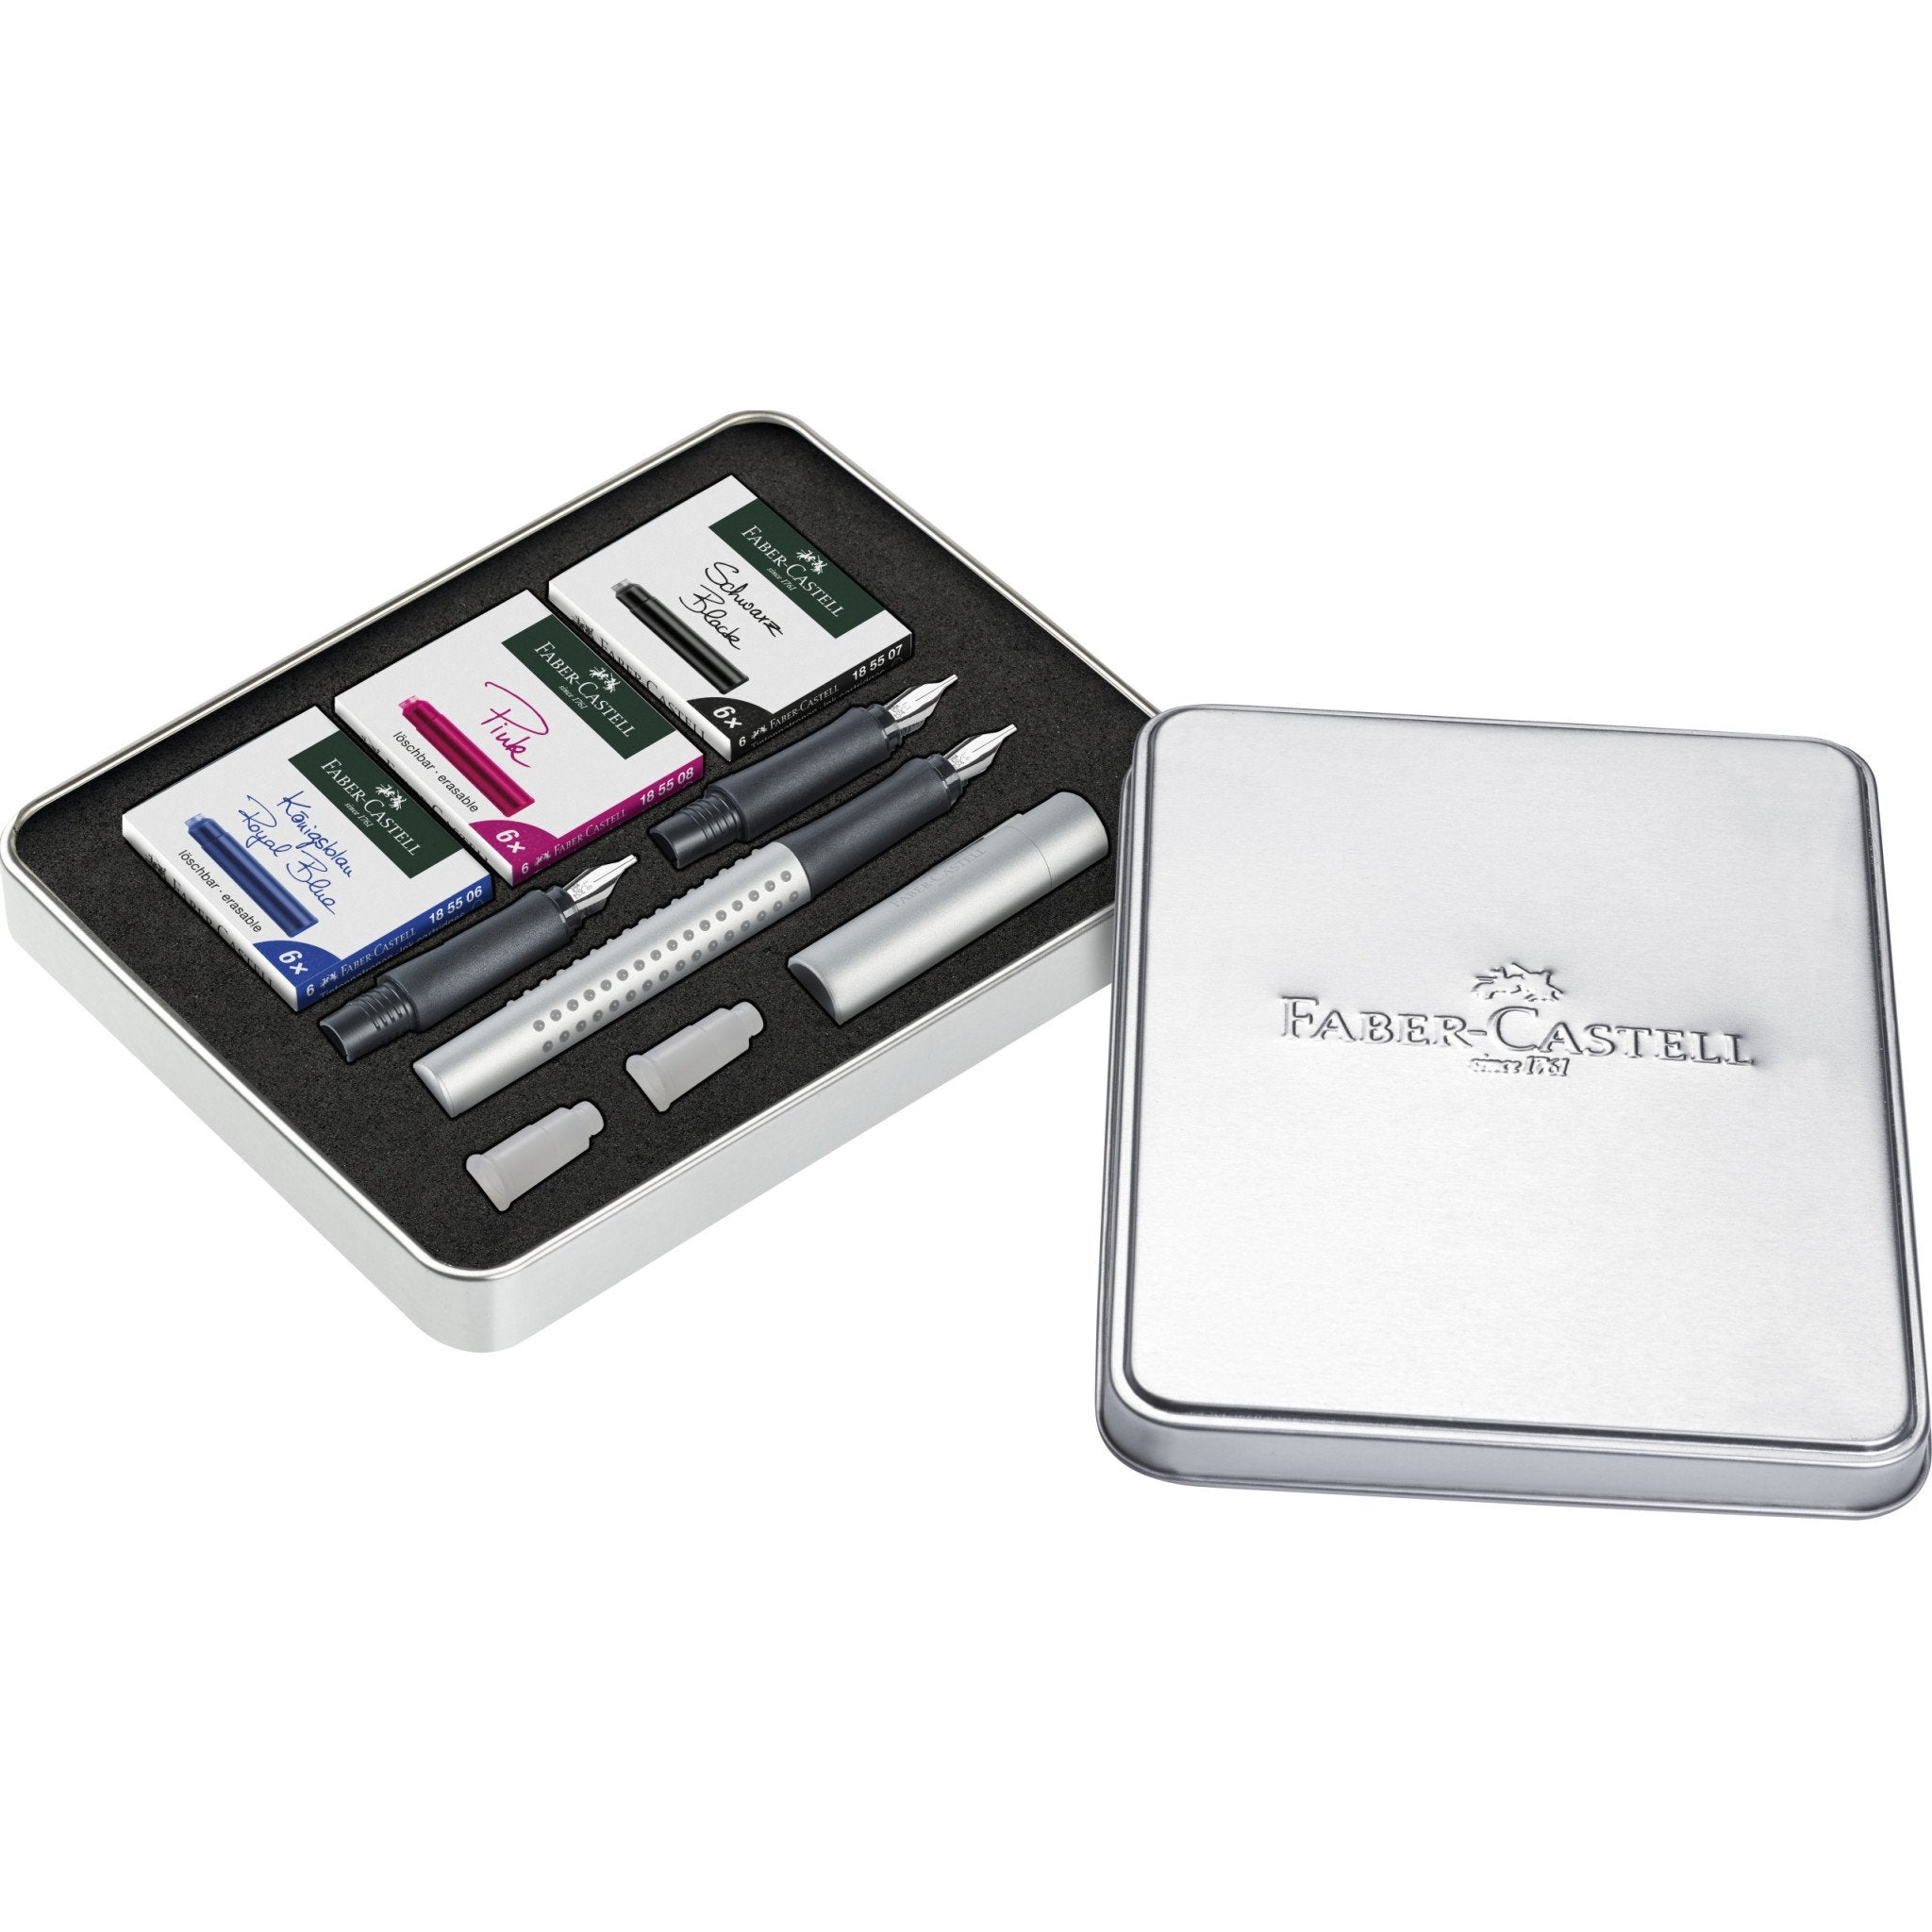 Faber Castell Grip 2011 Calligraphy Pen Gift Set - Silver